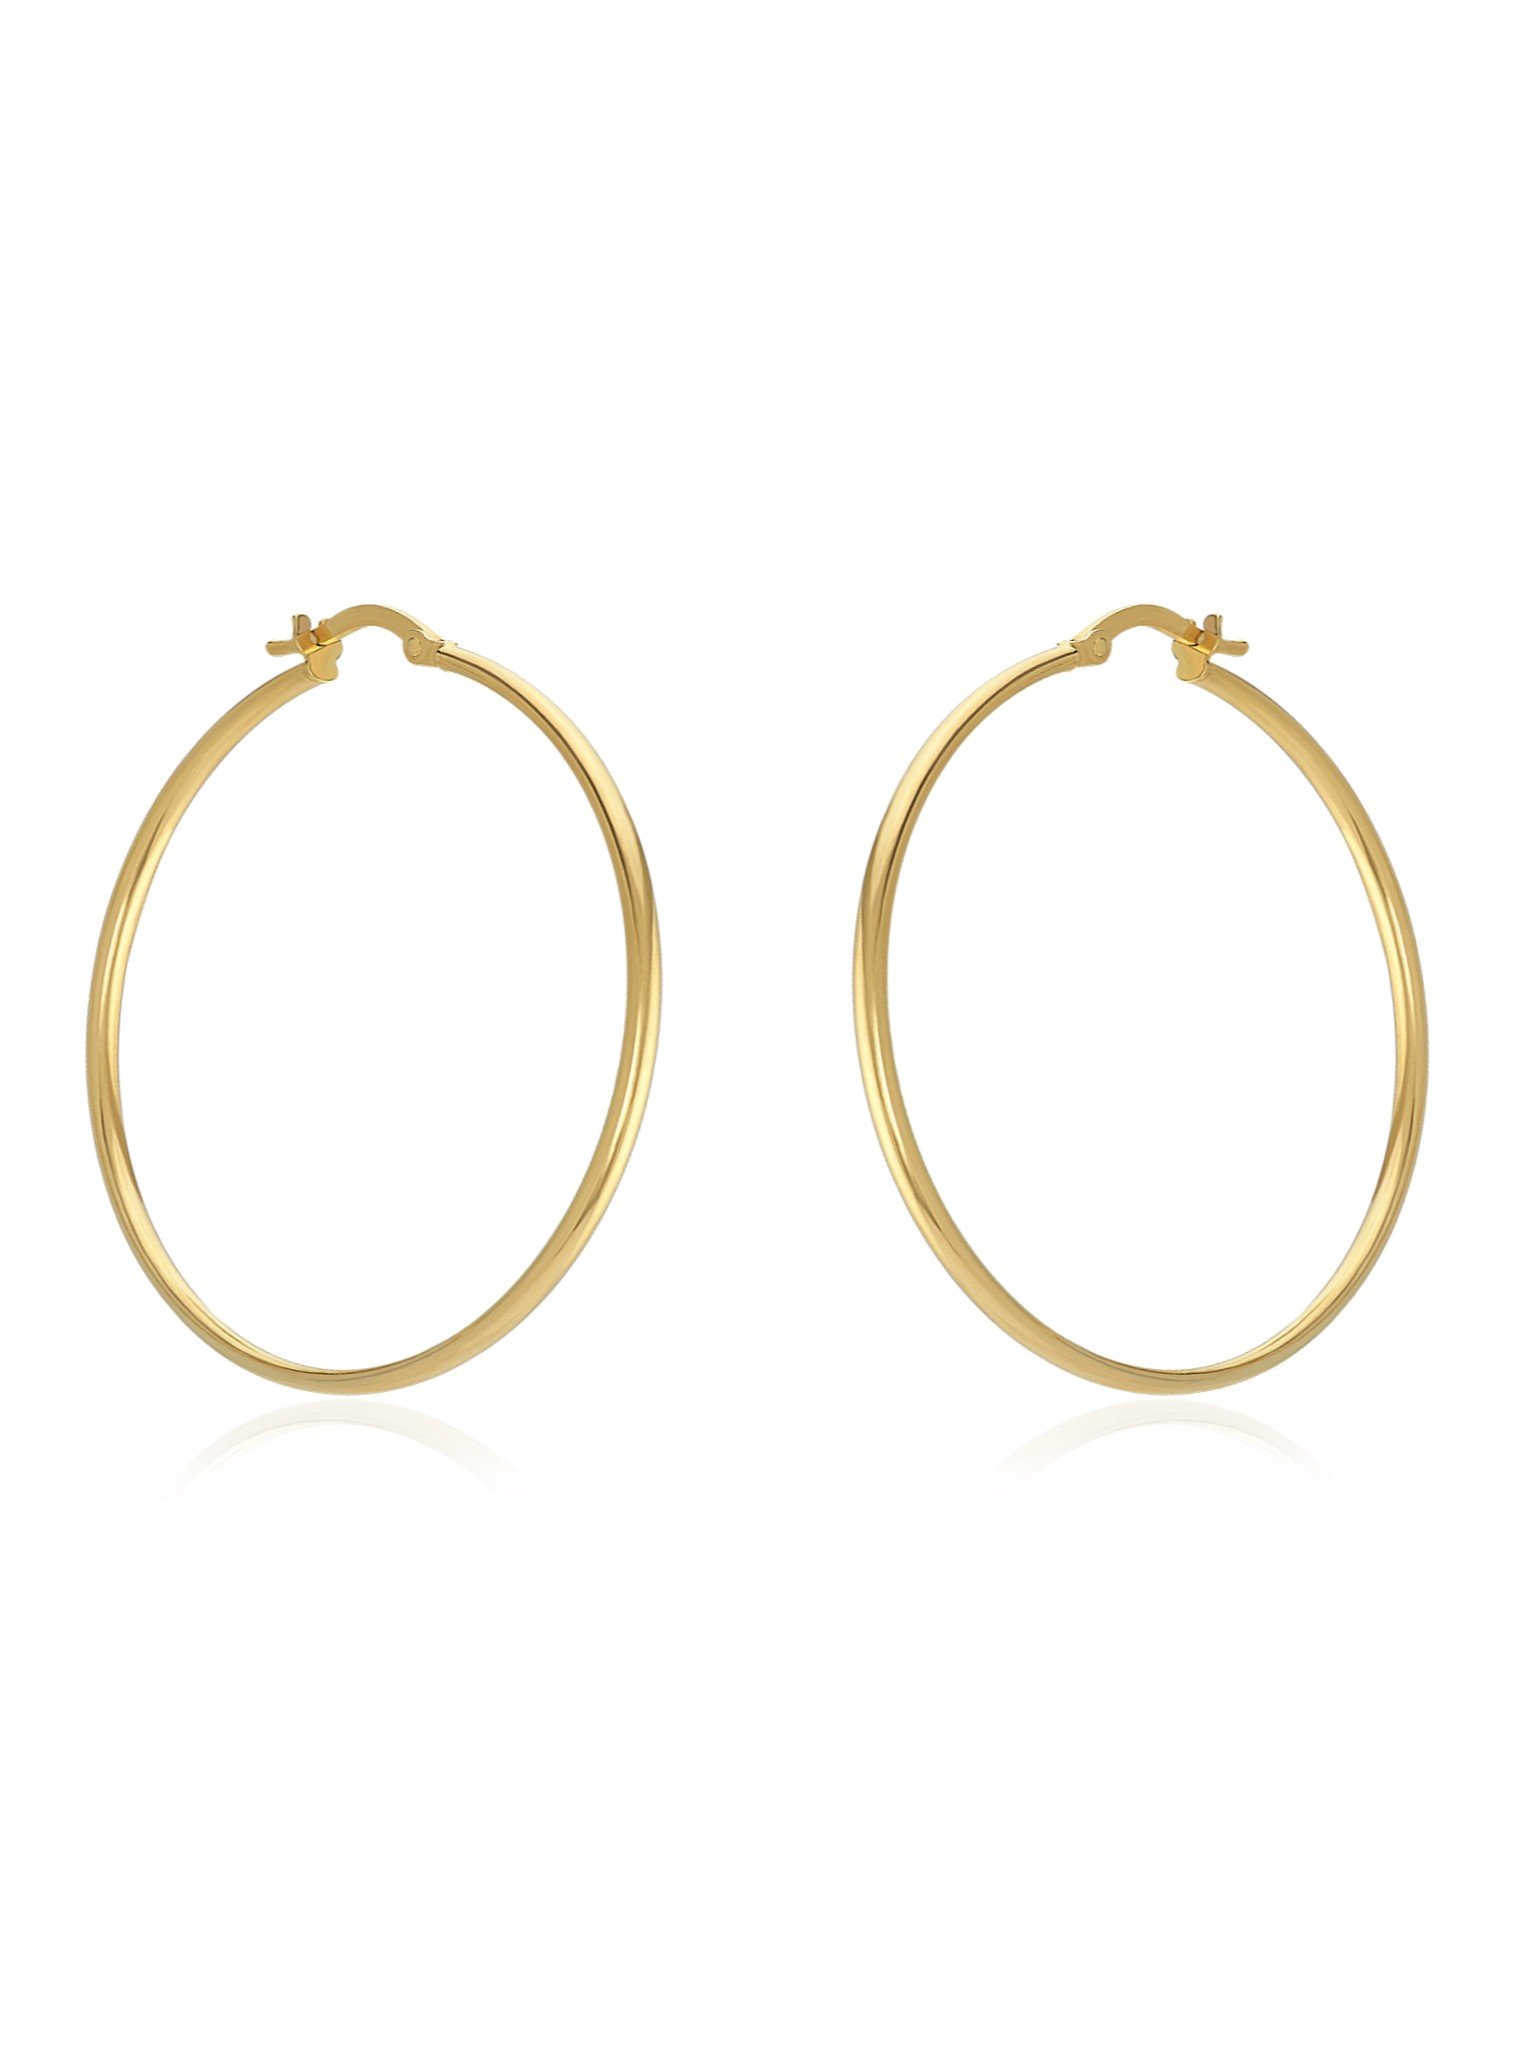 Large Gypsy Hoop Earrings in 9ct Yellow Gold — The Jewel Shop